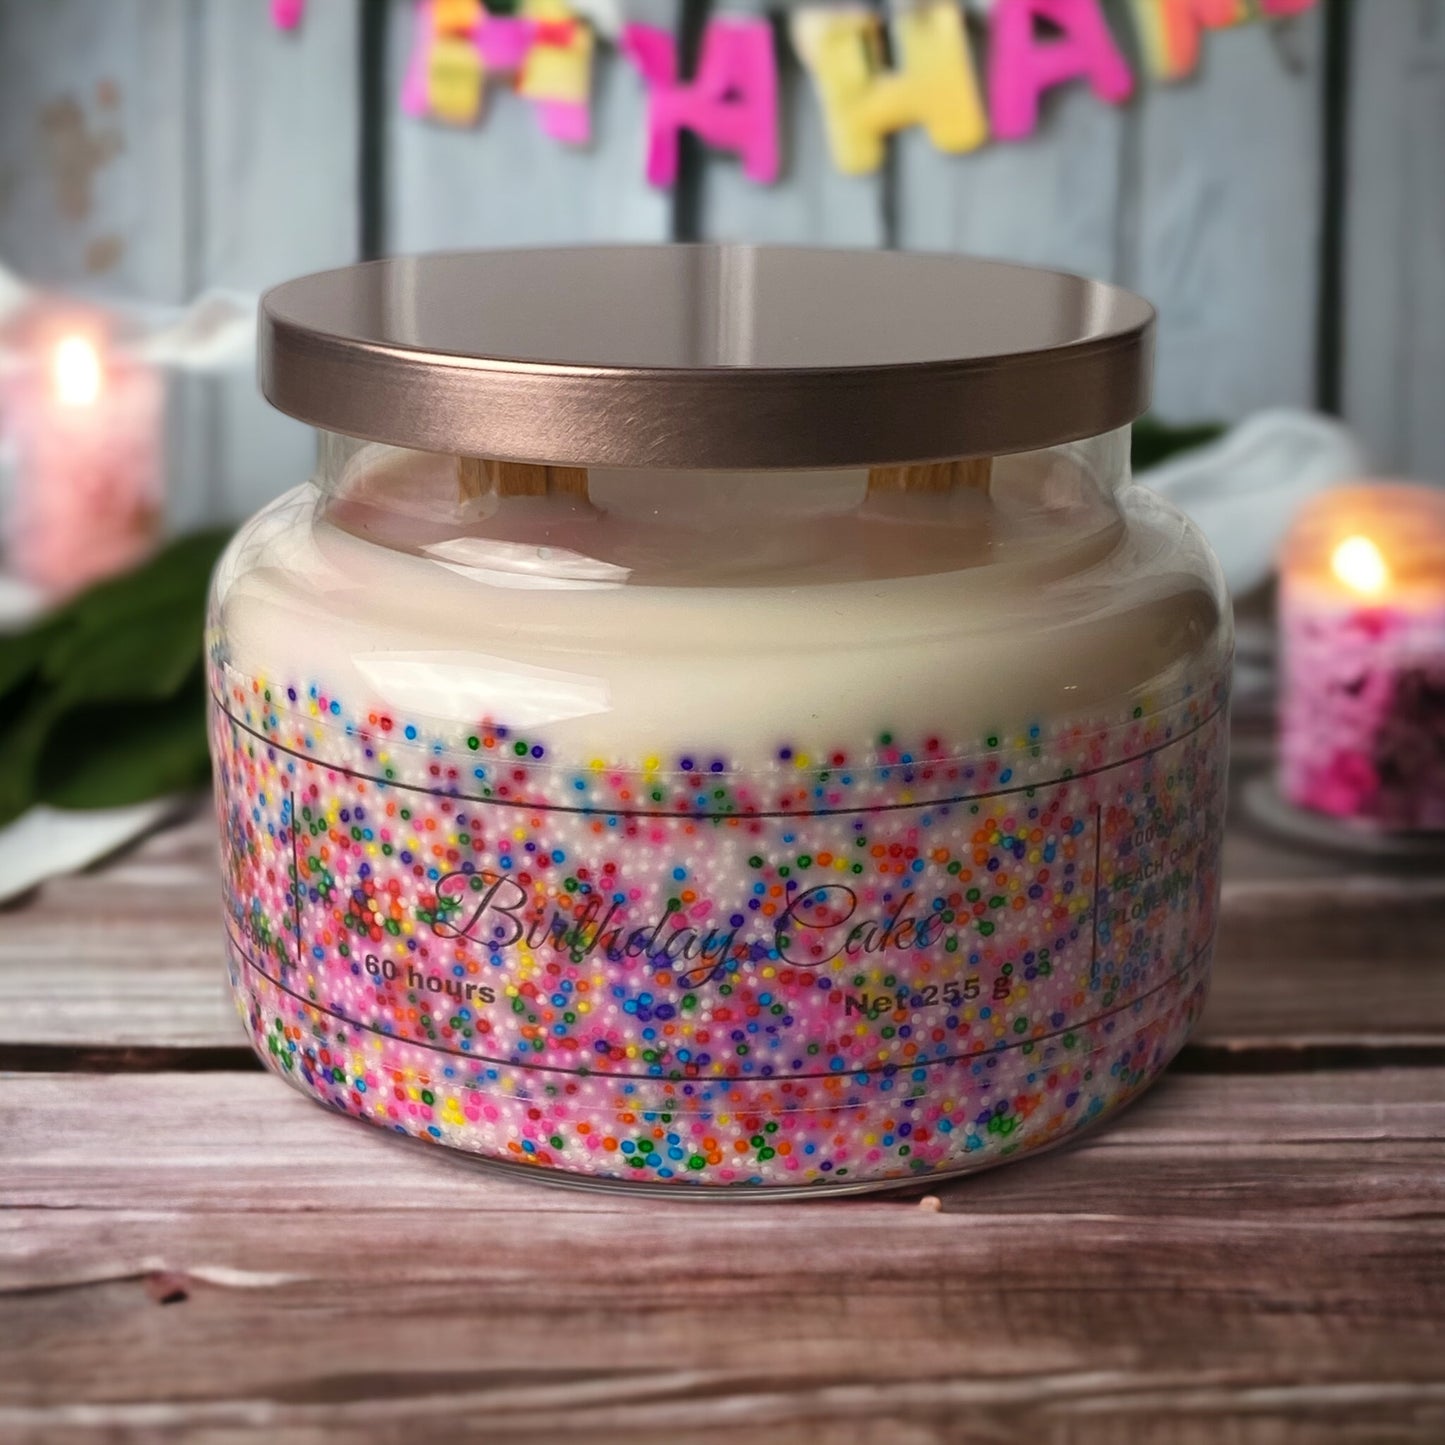 Handcrafted Birthday Cake Candles | Natural Soy Wax | Delicious Vanilla & Cream Scented for Birthday Gifts